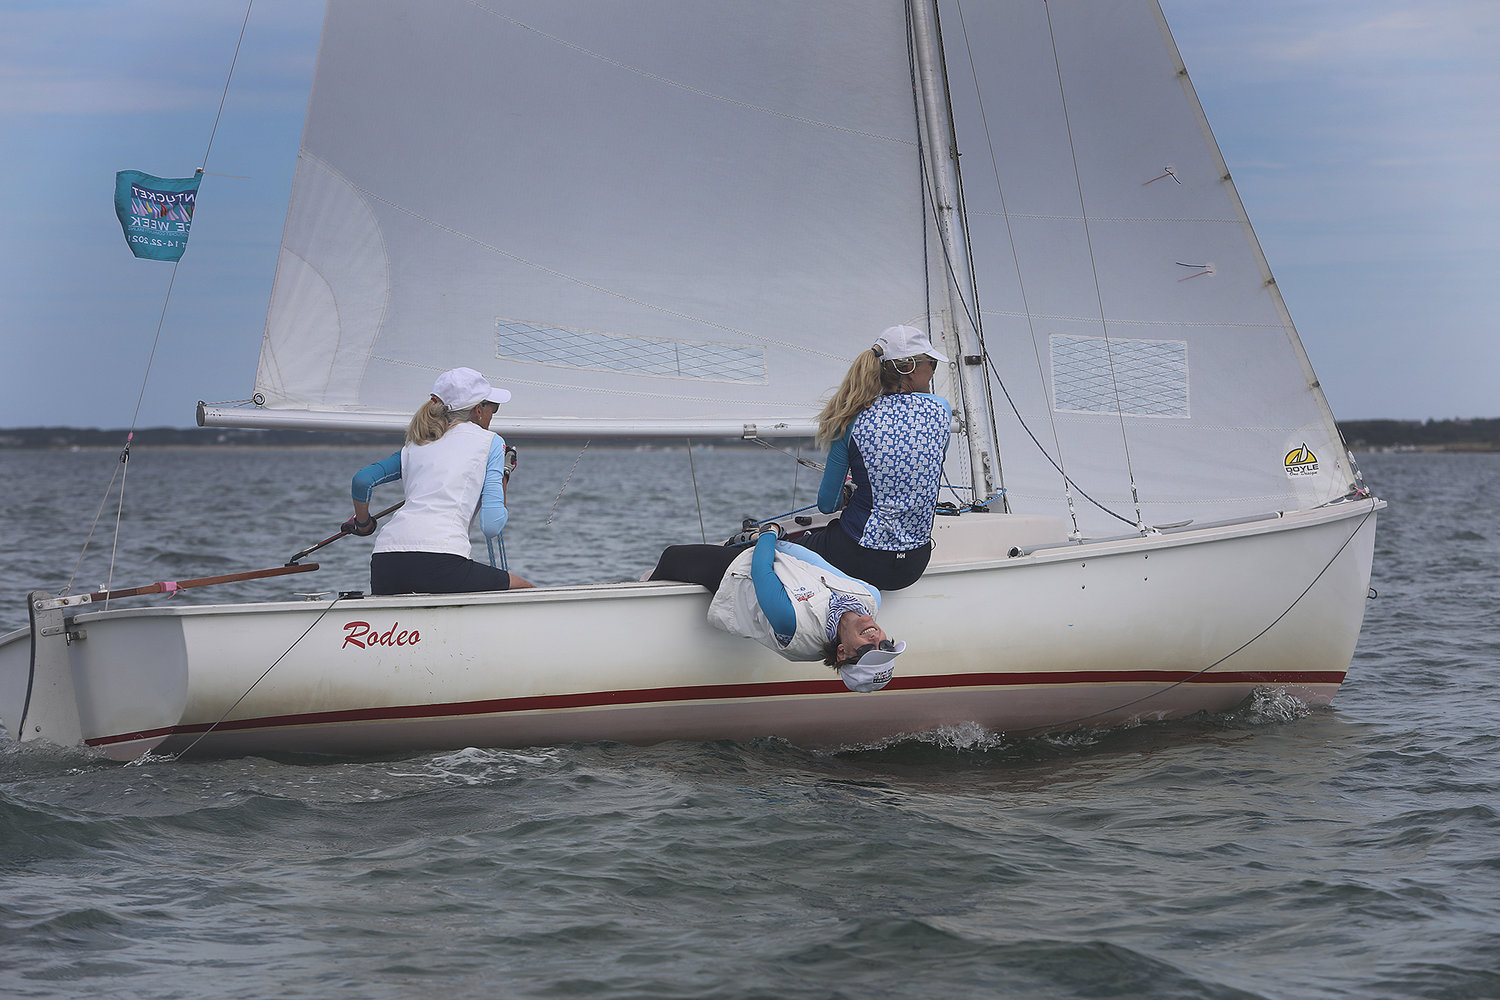 Kim Frisbie enjoys "hiking" aboard the Rodeo with Linda Johnson at the tiller and Minou Palandjian forward during the 2021 Women's Regatta in the harbor on Wednesday.